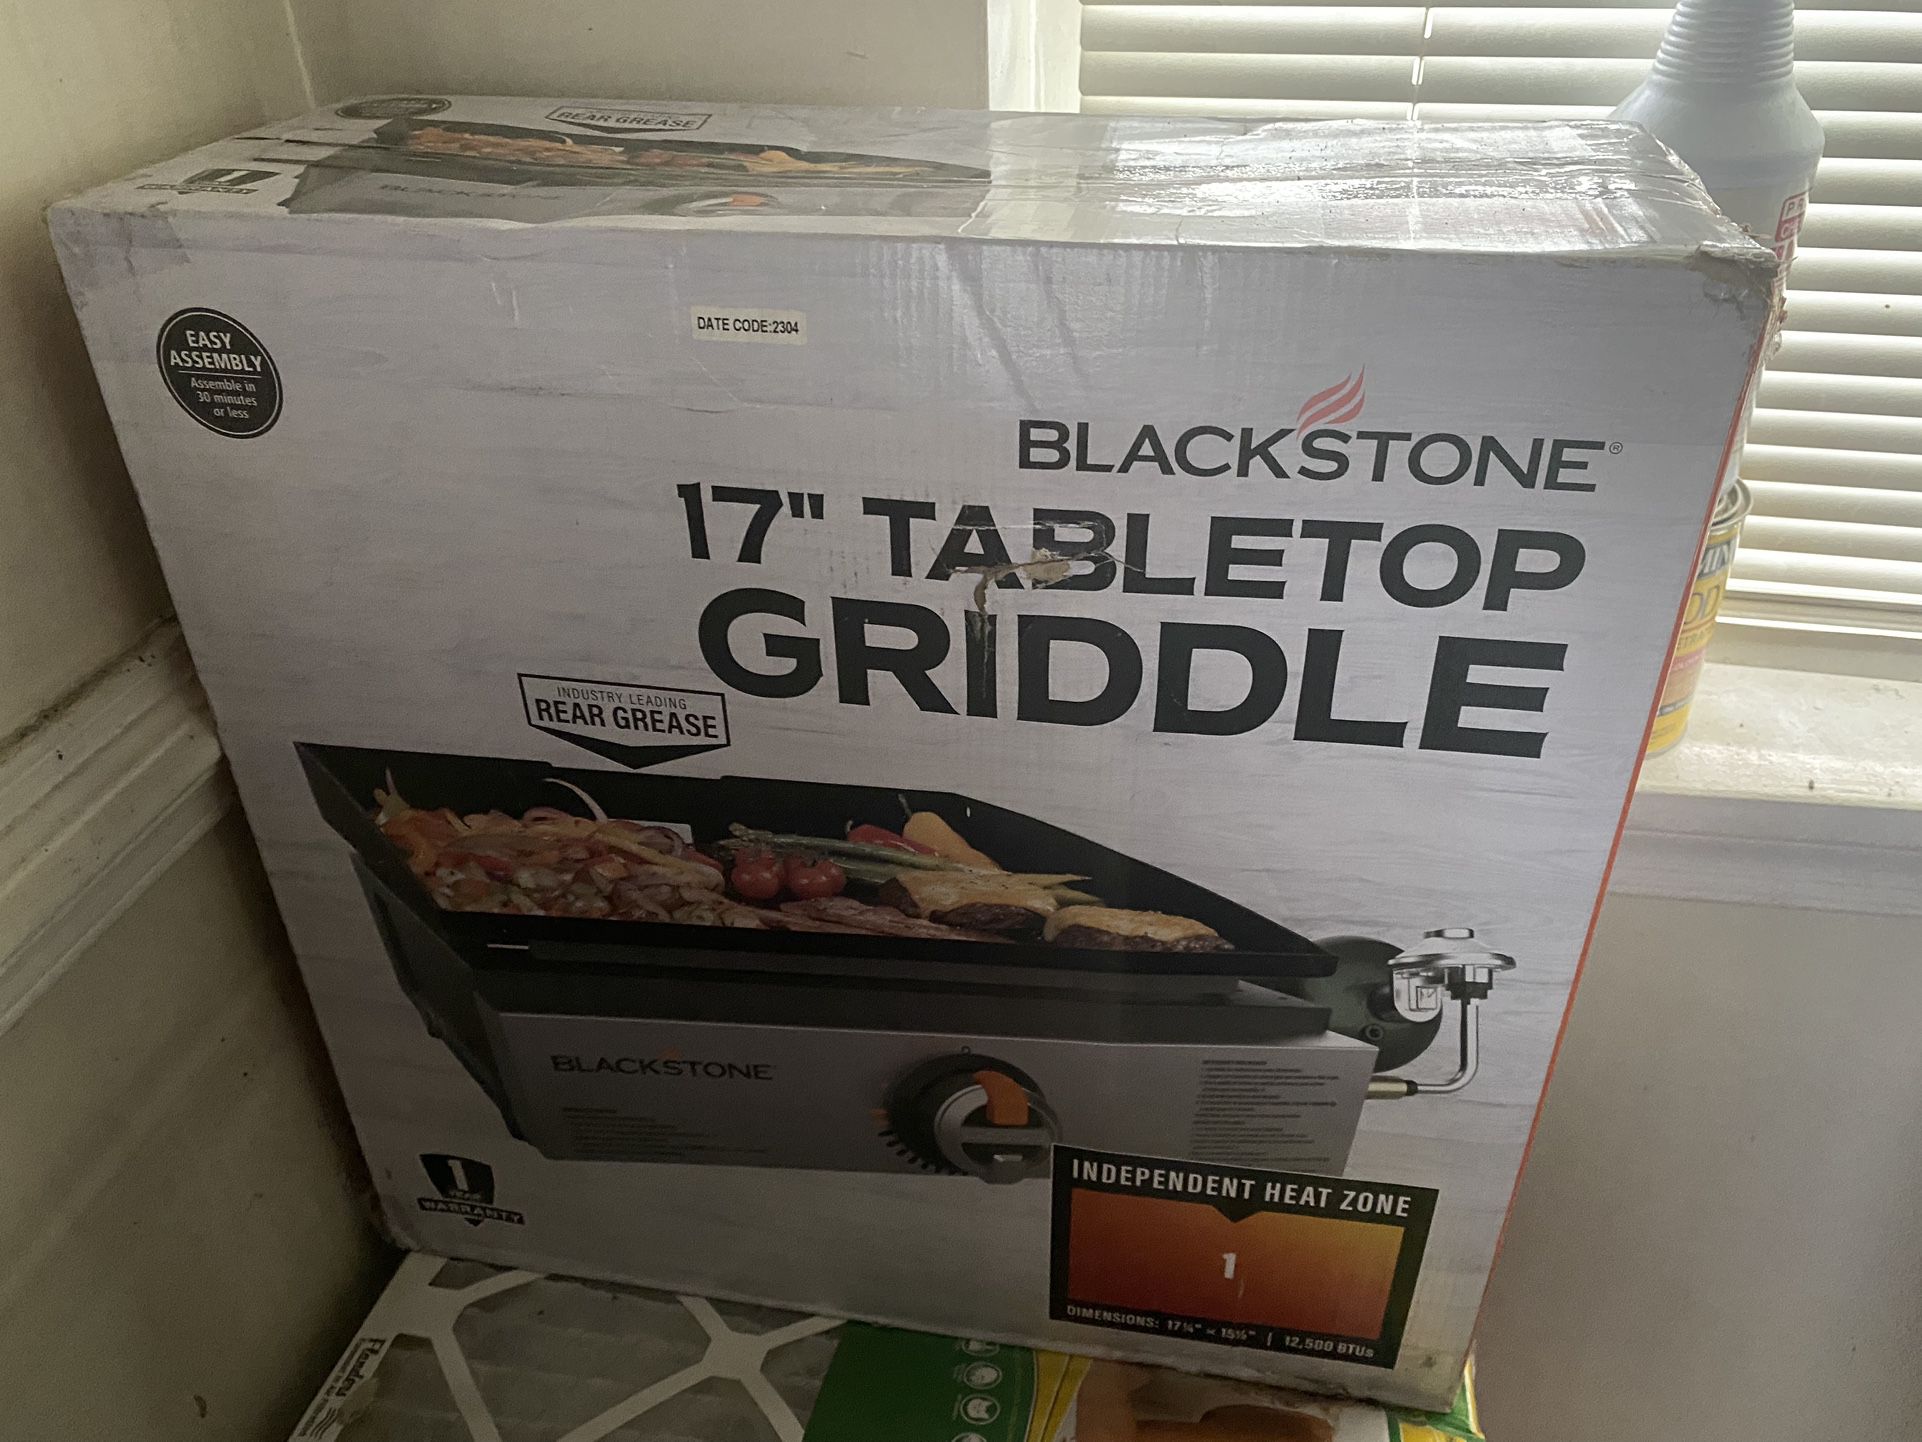 New Never Used Table Top Blackstone Griddle 